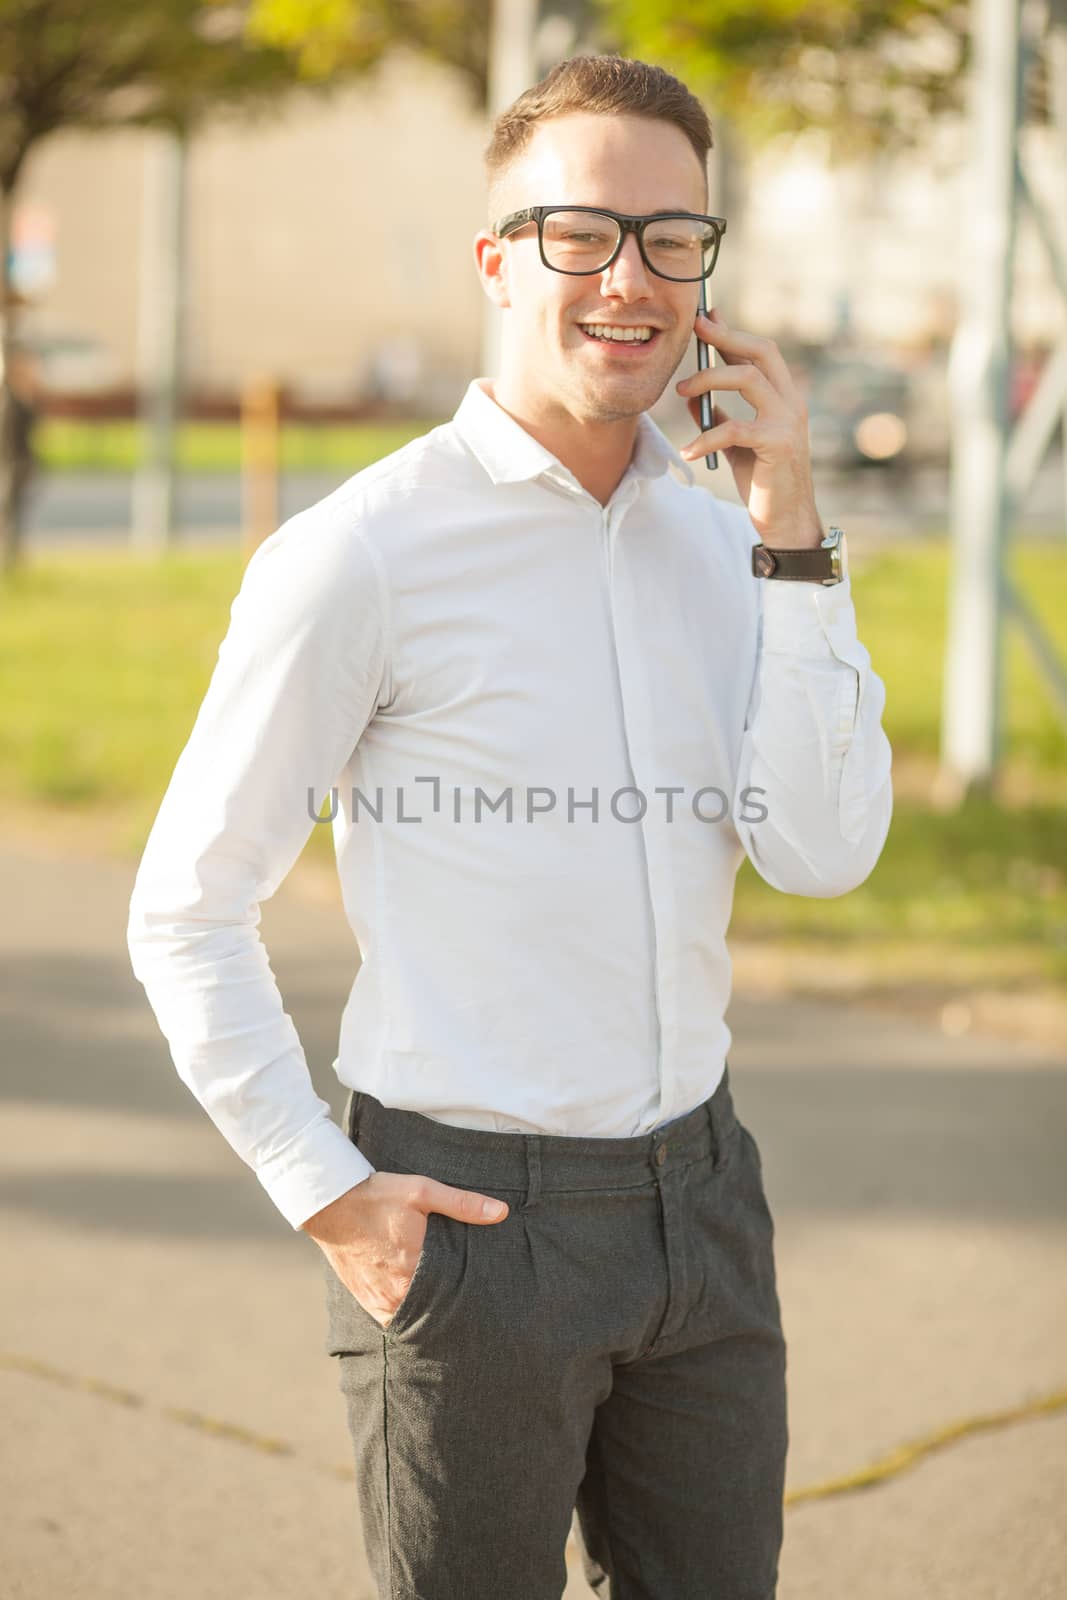 Man with glasses speak on mobile phone in hands by adamr